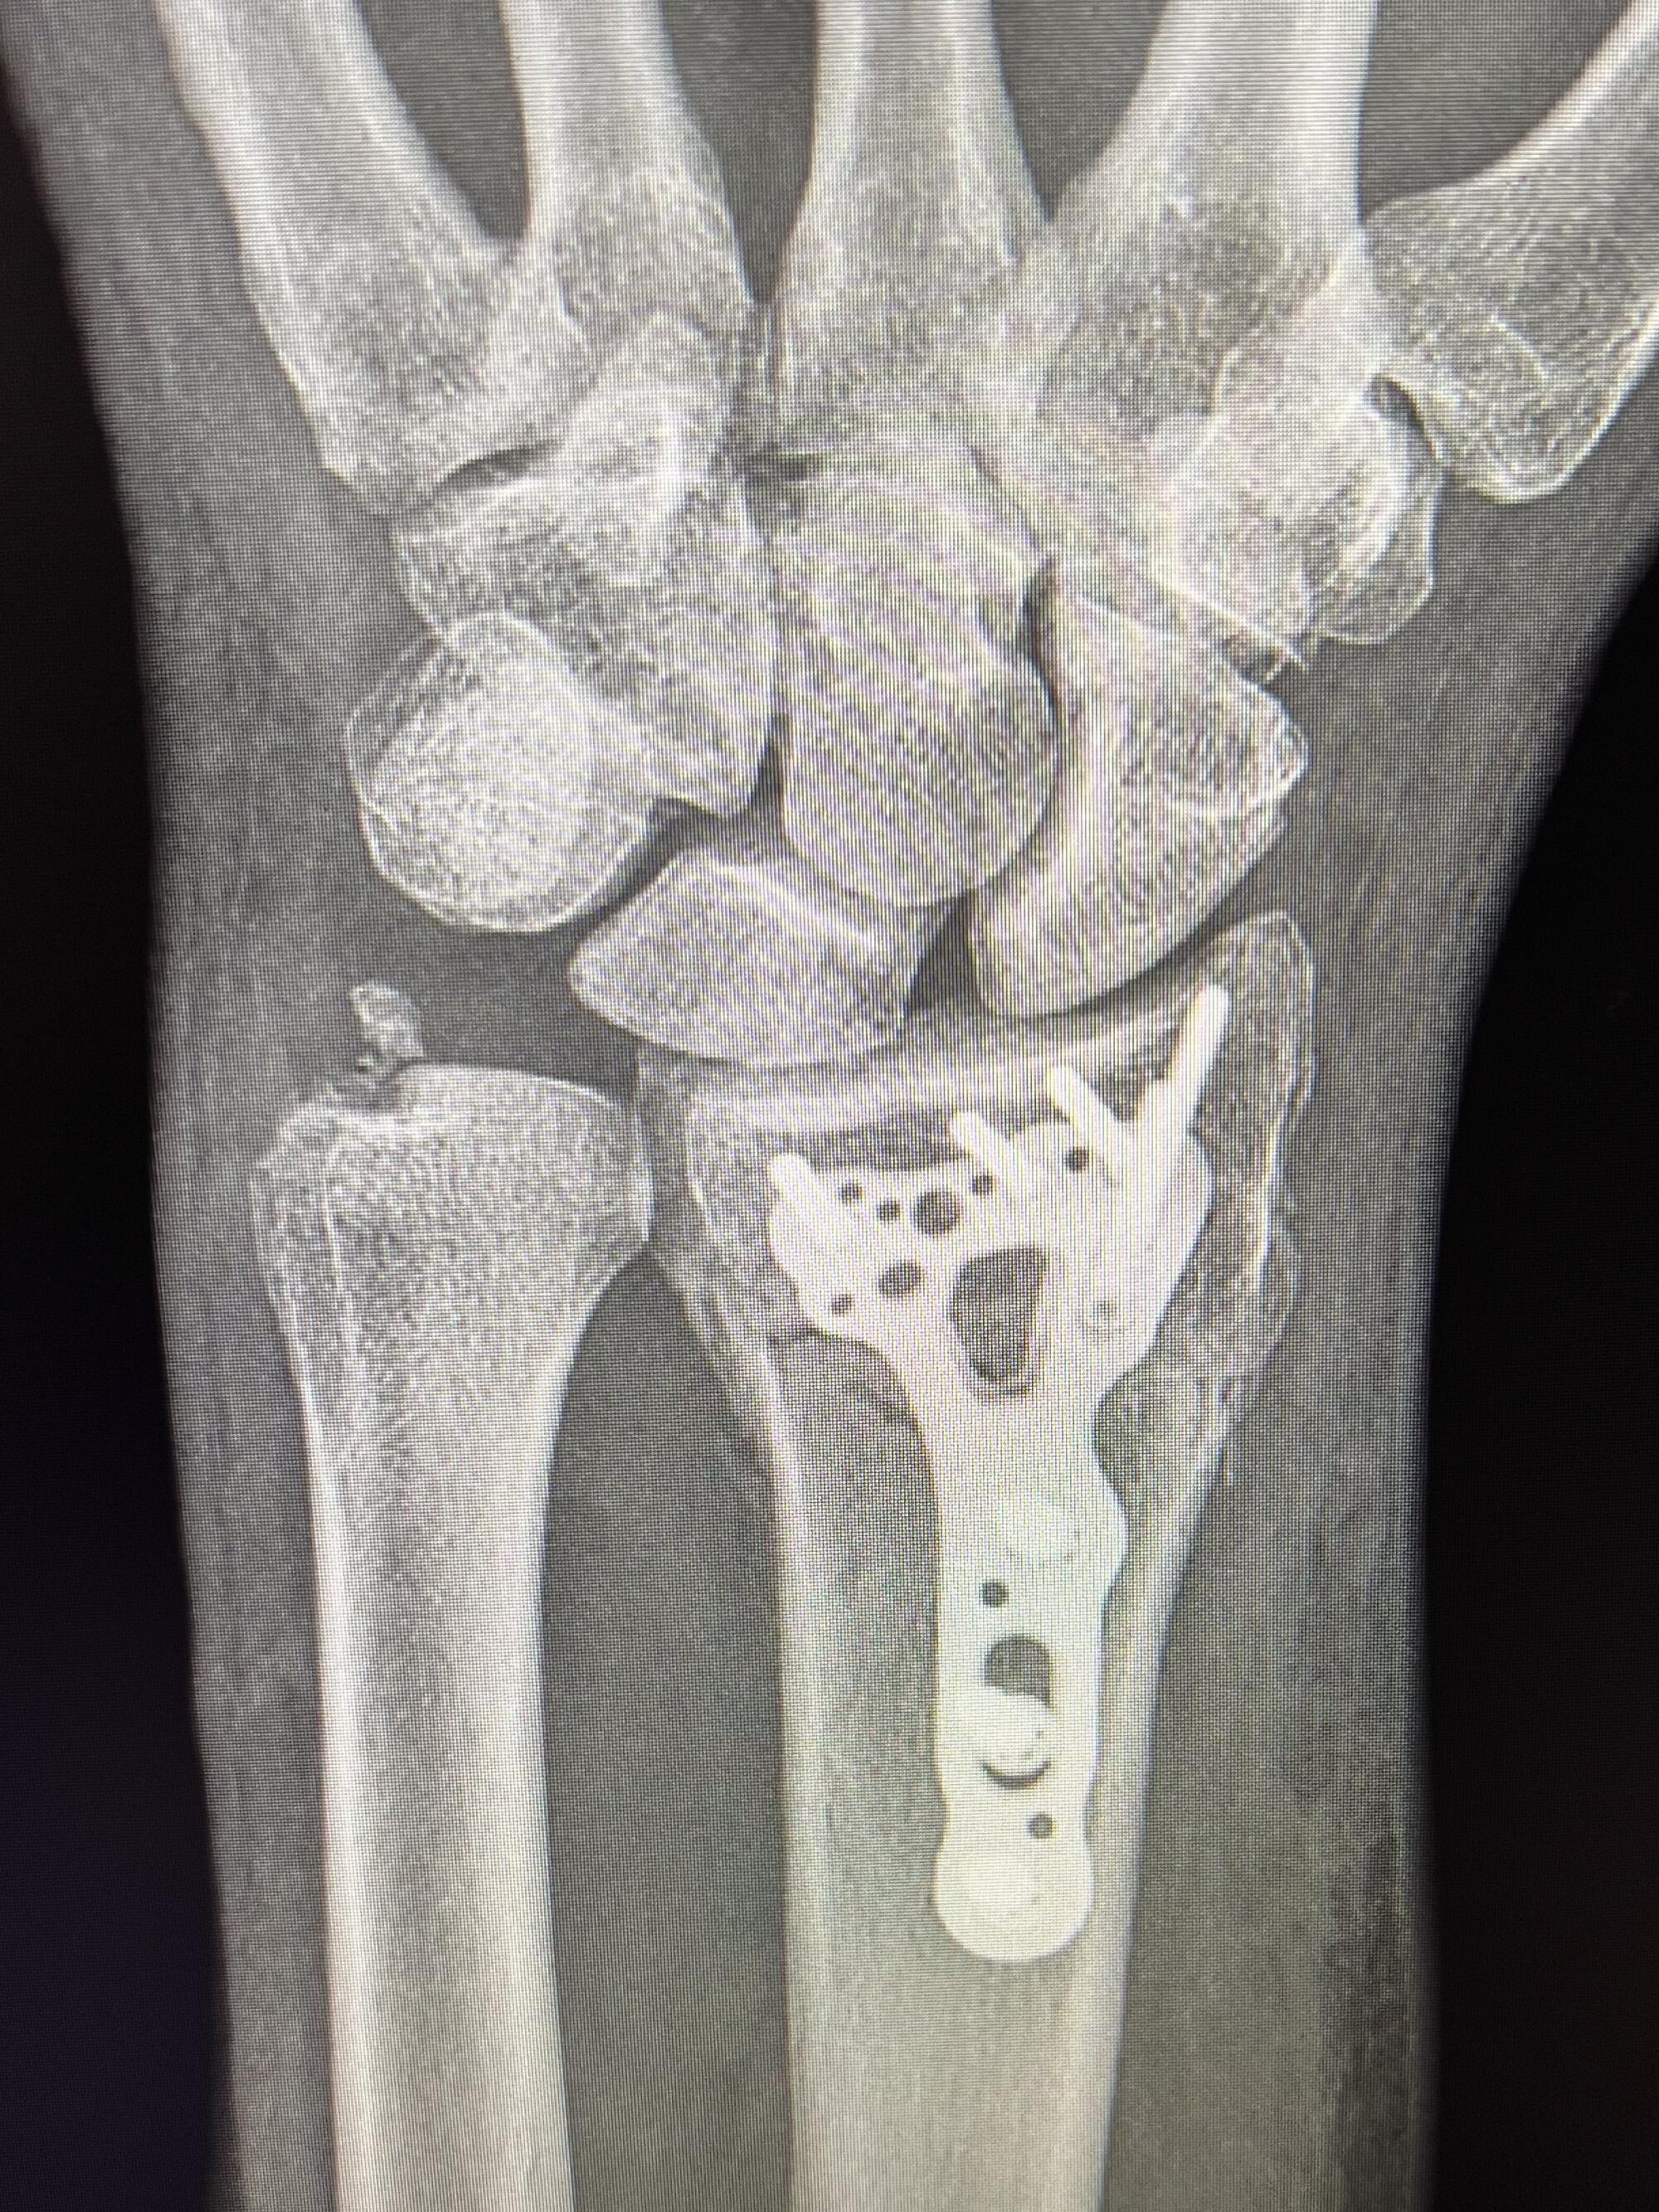 An X-ray shows a titanium plate and screws in the left wrist of Tim Salmon after his accident.